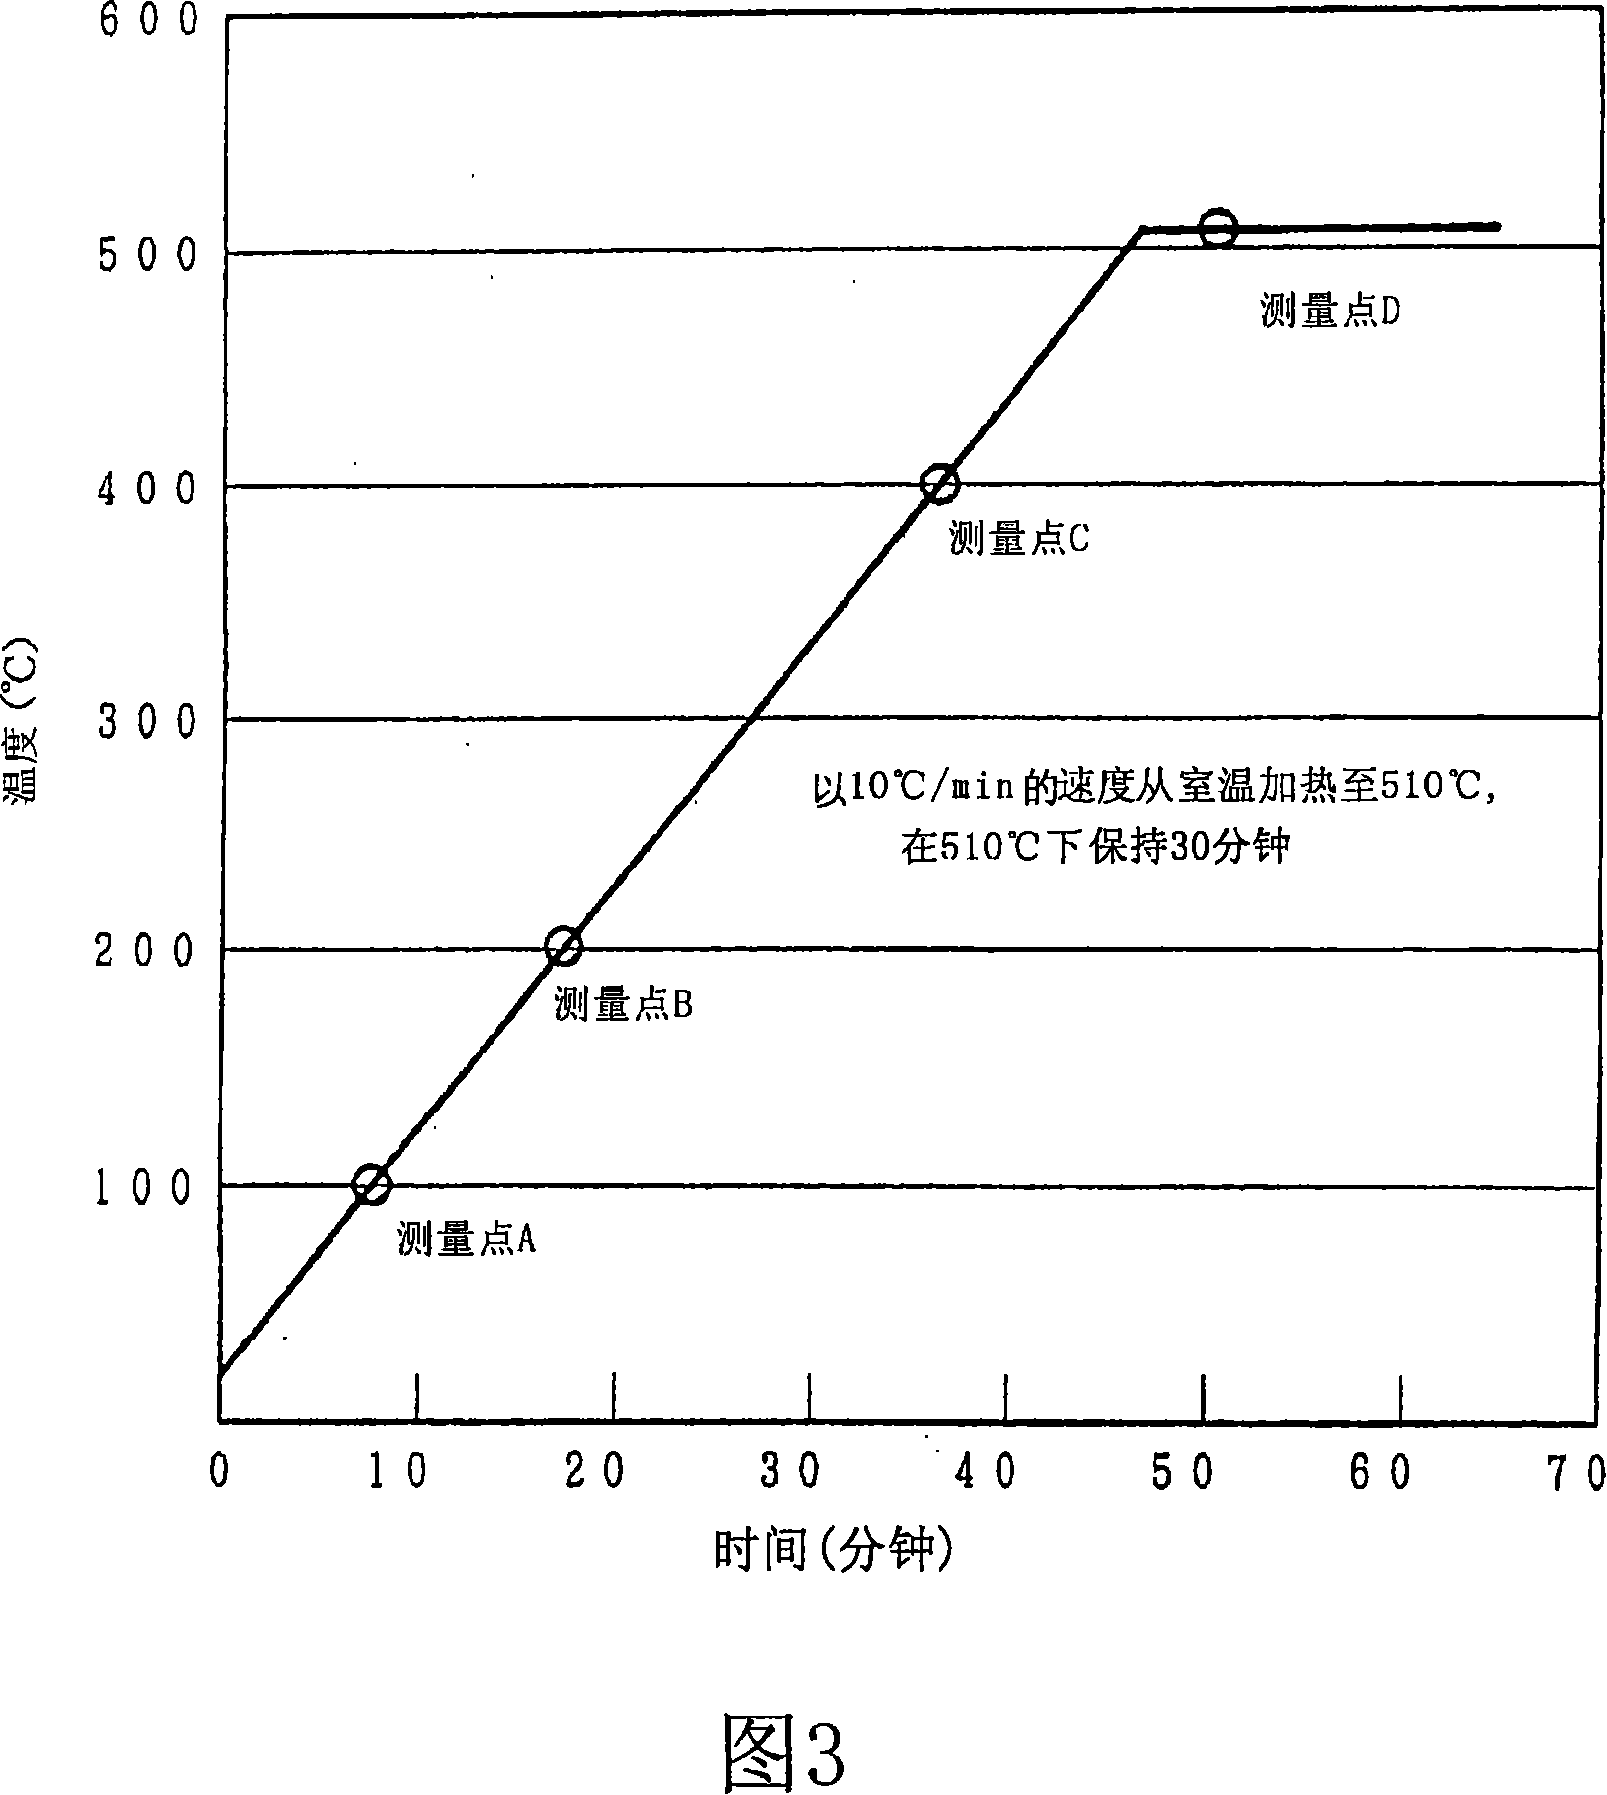 Method for forming light absorbing layer in cis-based thin film solar battery